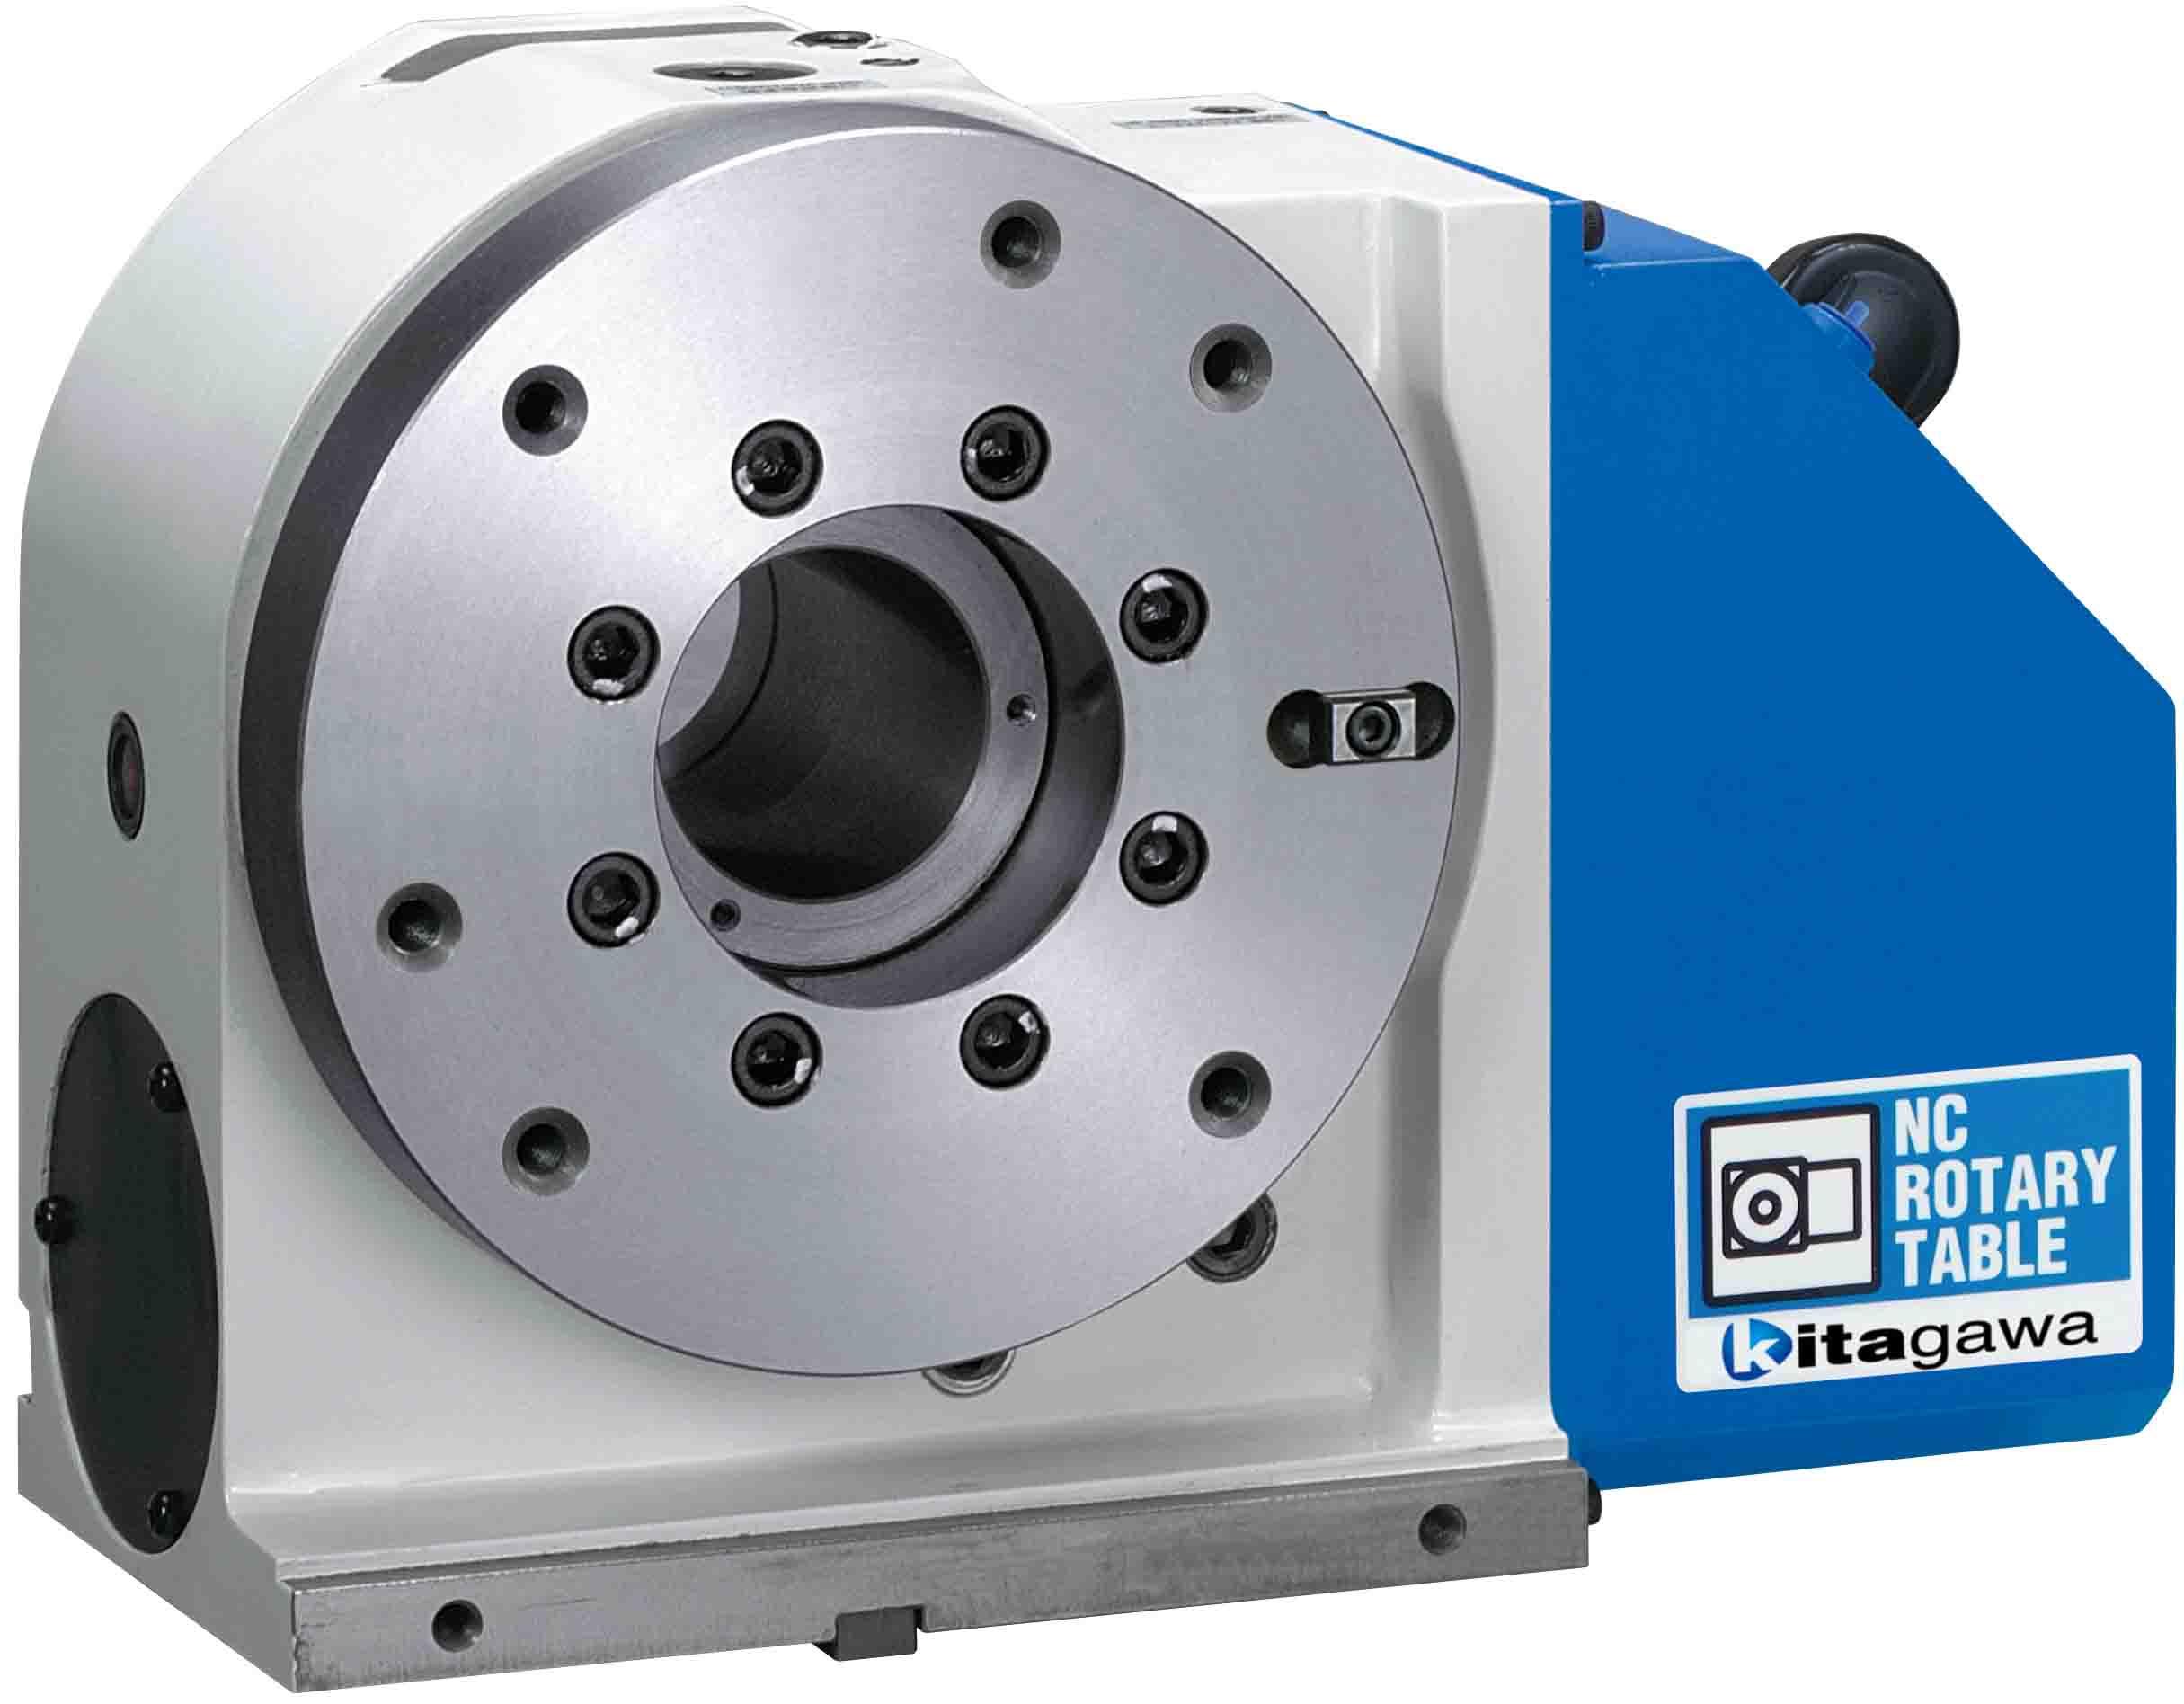 MR Series Standard 4th Axis Rotary Table